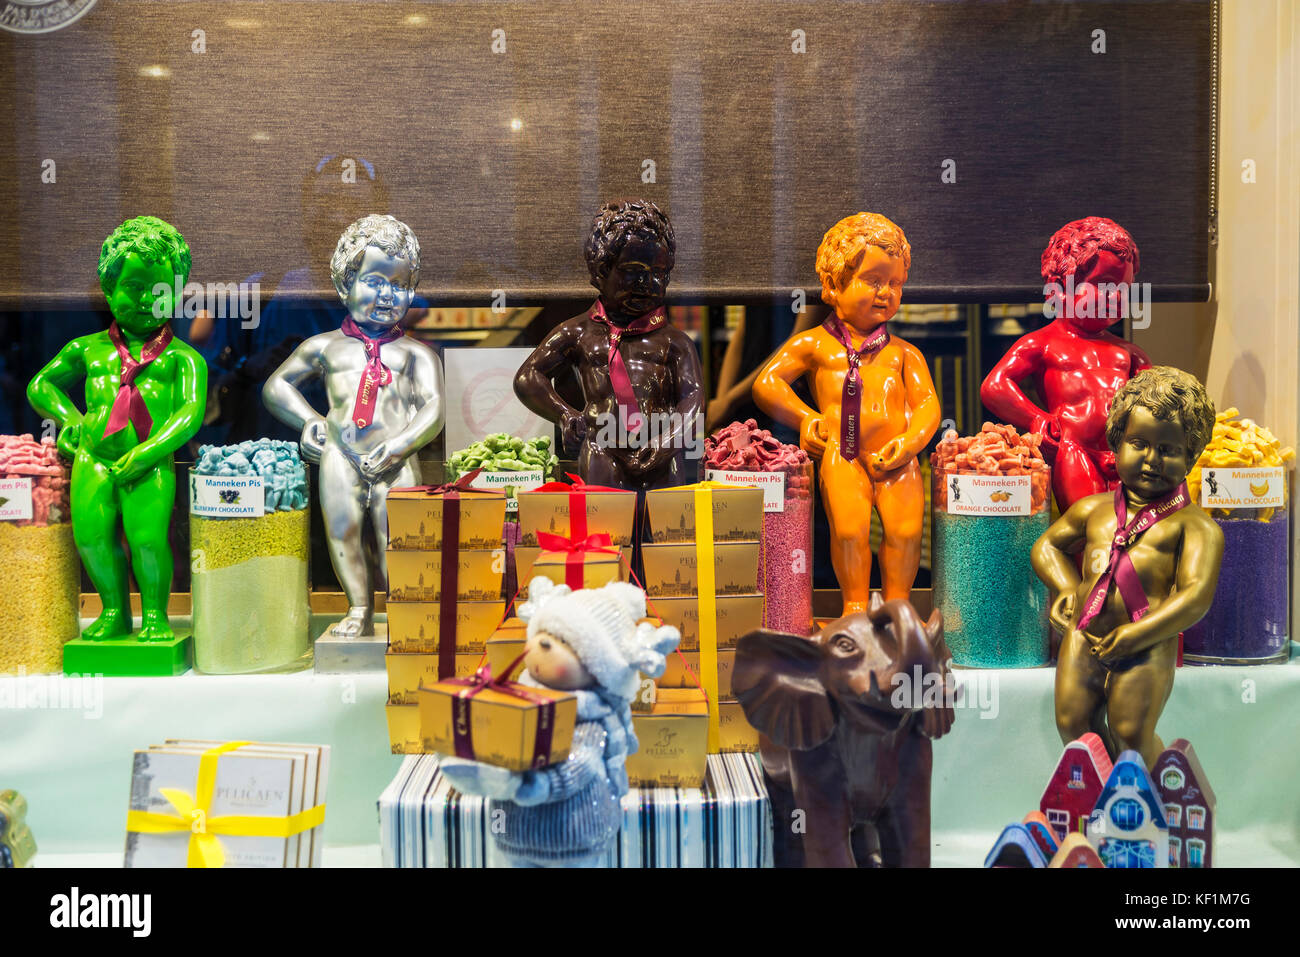 Brussels, Belgium - August 26, 2017: Statue of chocolate of Manneken pis as a candy store decoration located in the historical center of Brussels, Bel Stock Photo